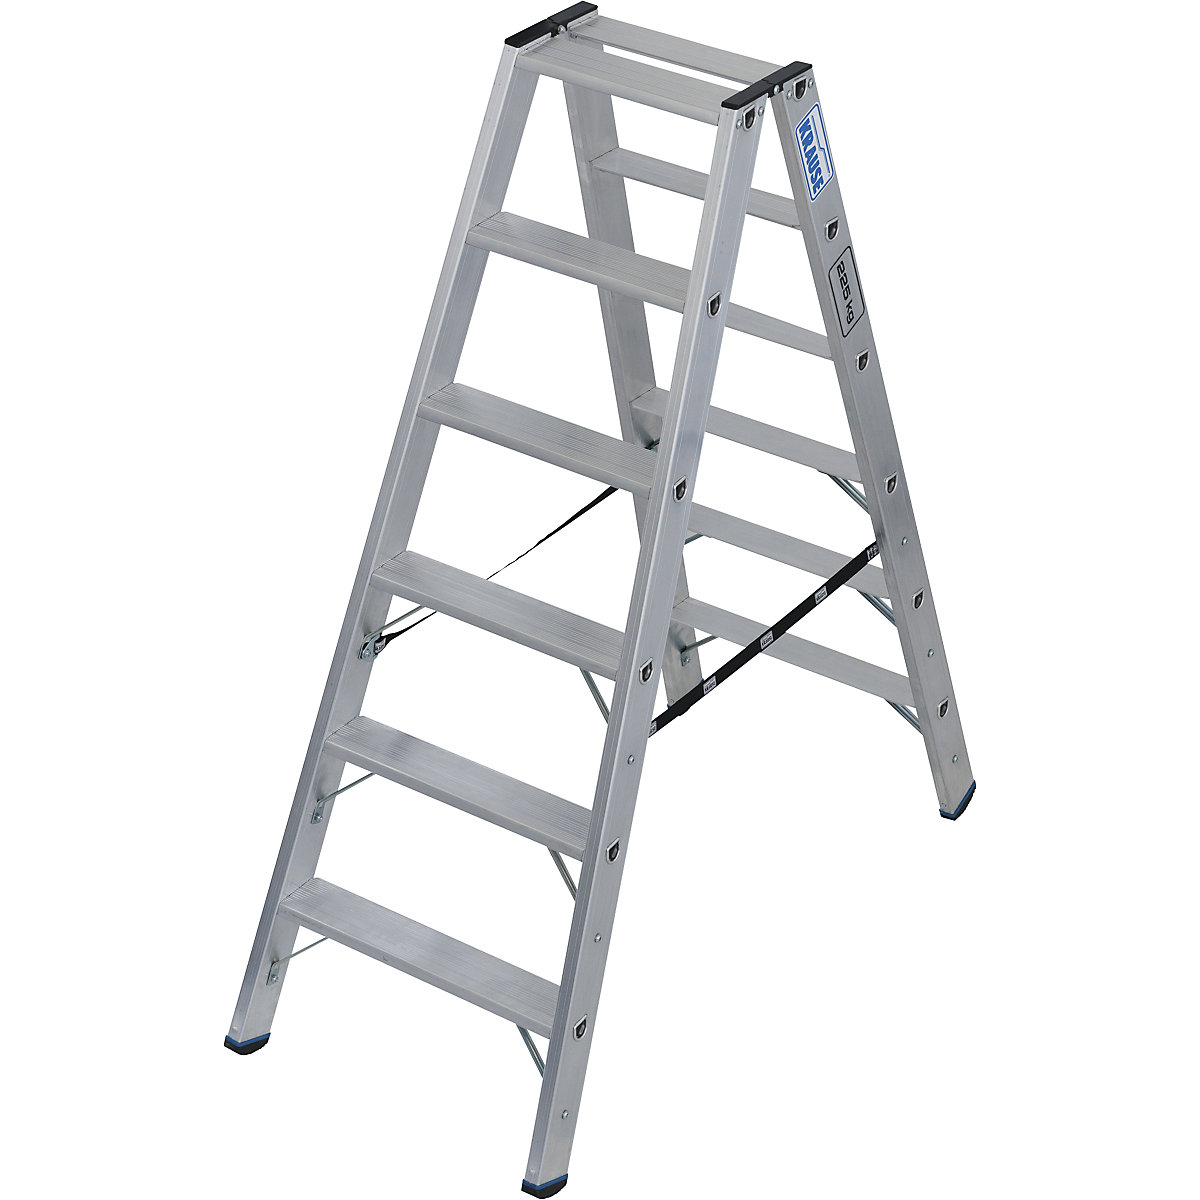 Heavy duty step ladder – KRAUSE, double sided access, up to 225 kg, 2x6 steps-2